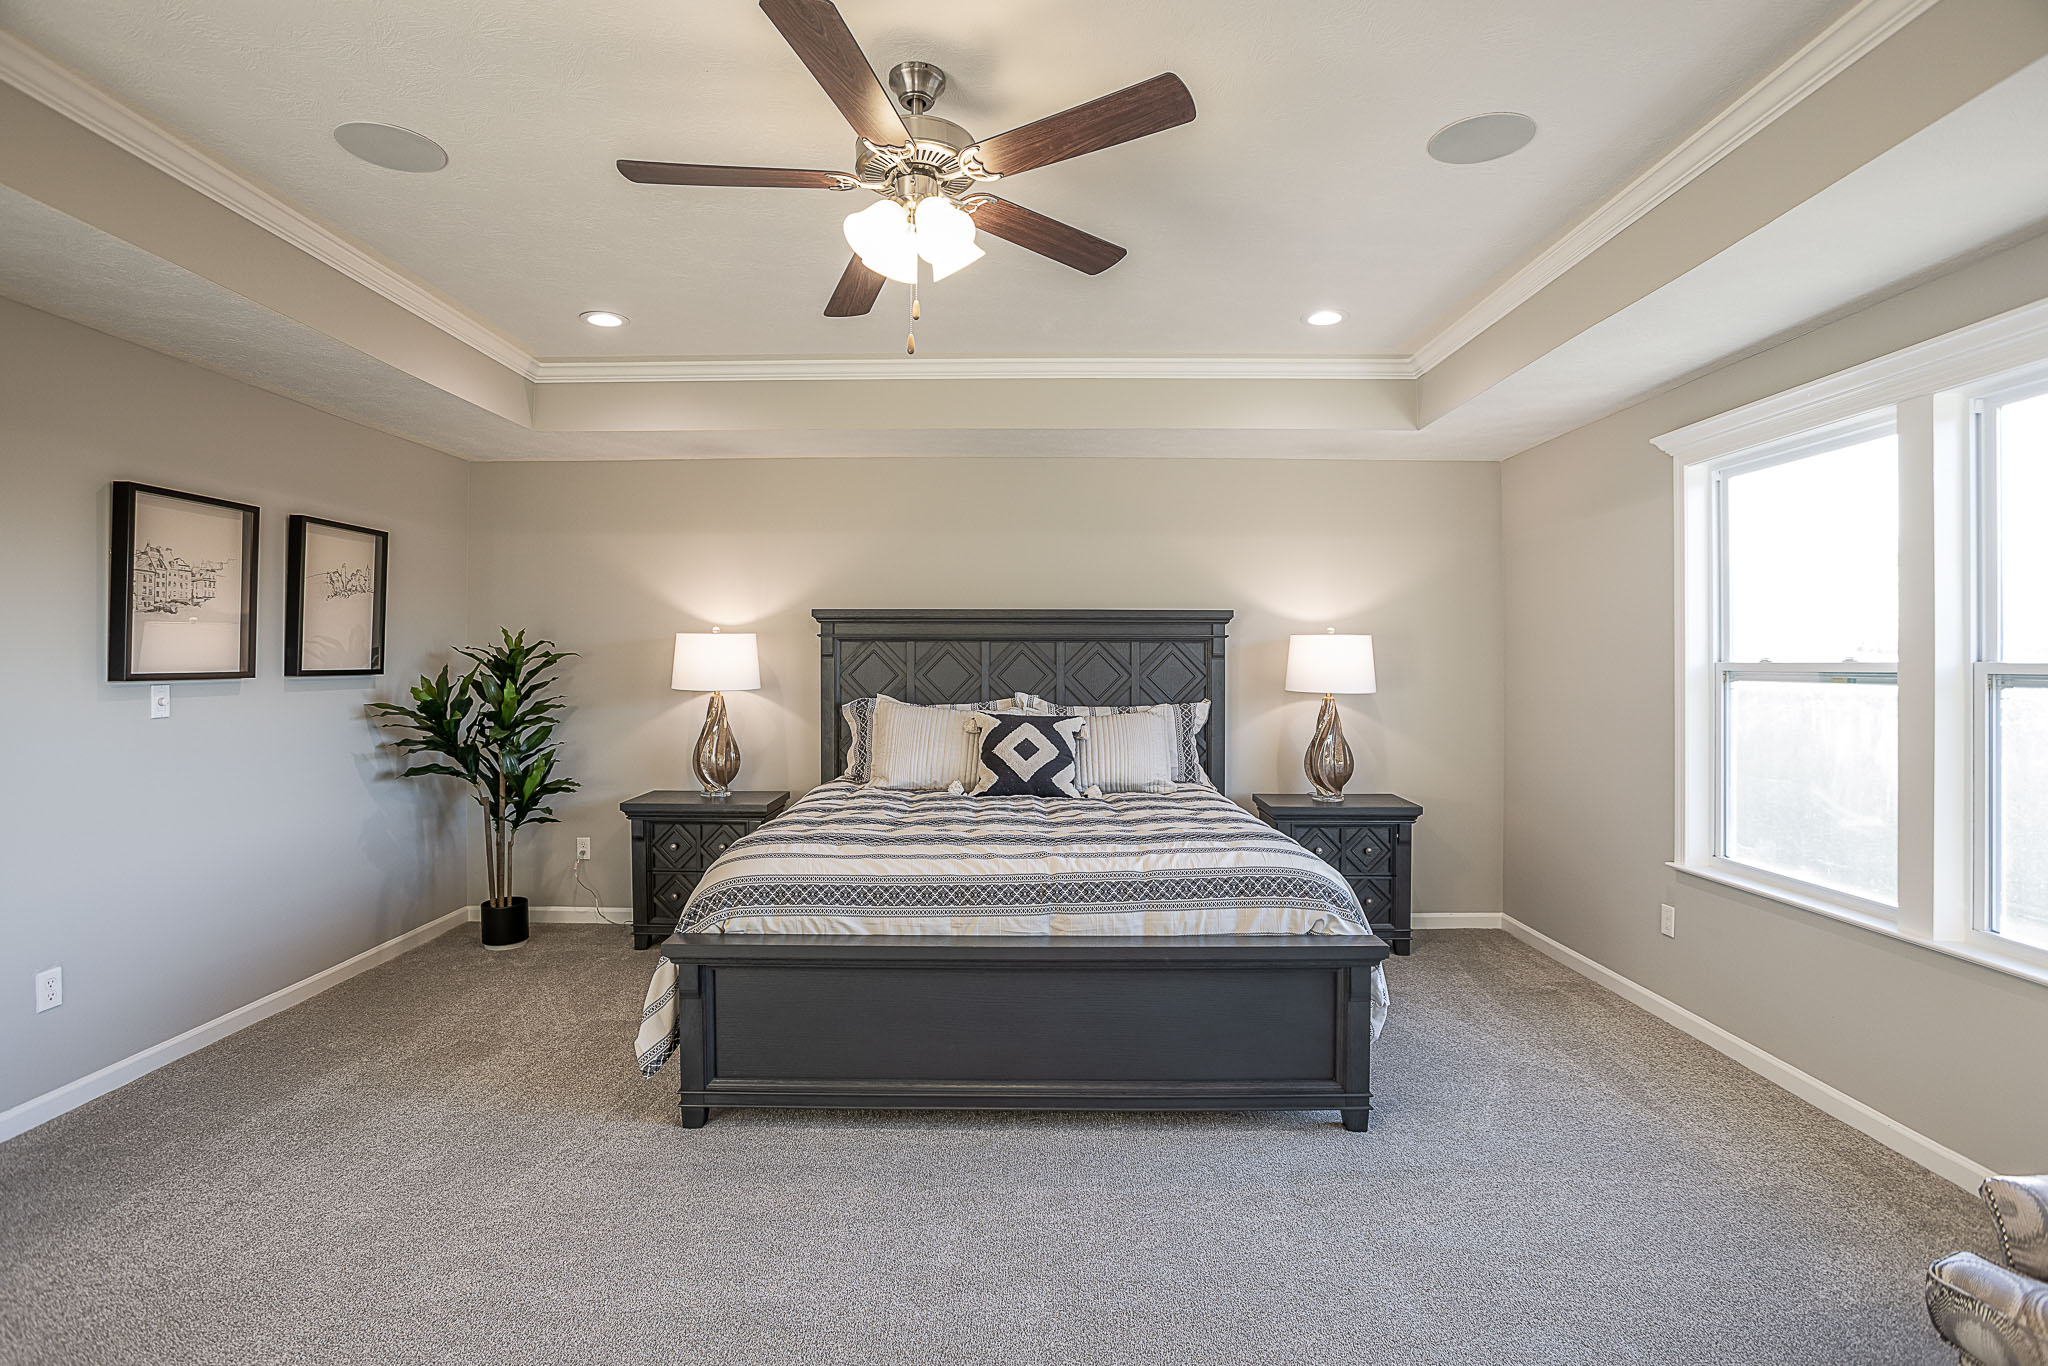 Master bedroom in a new construction home in South Fayette, PA